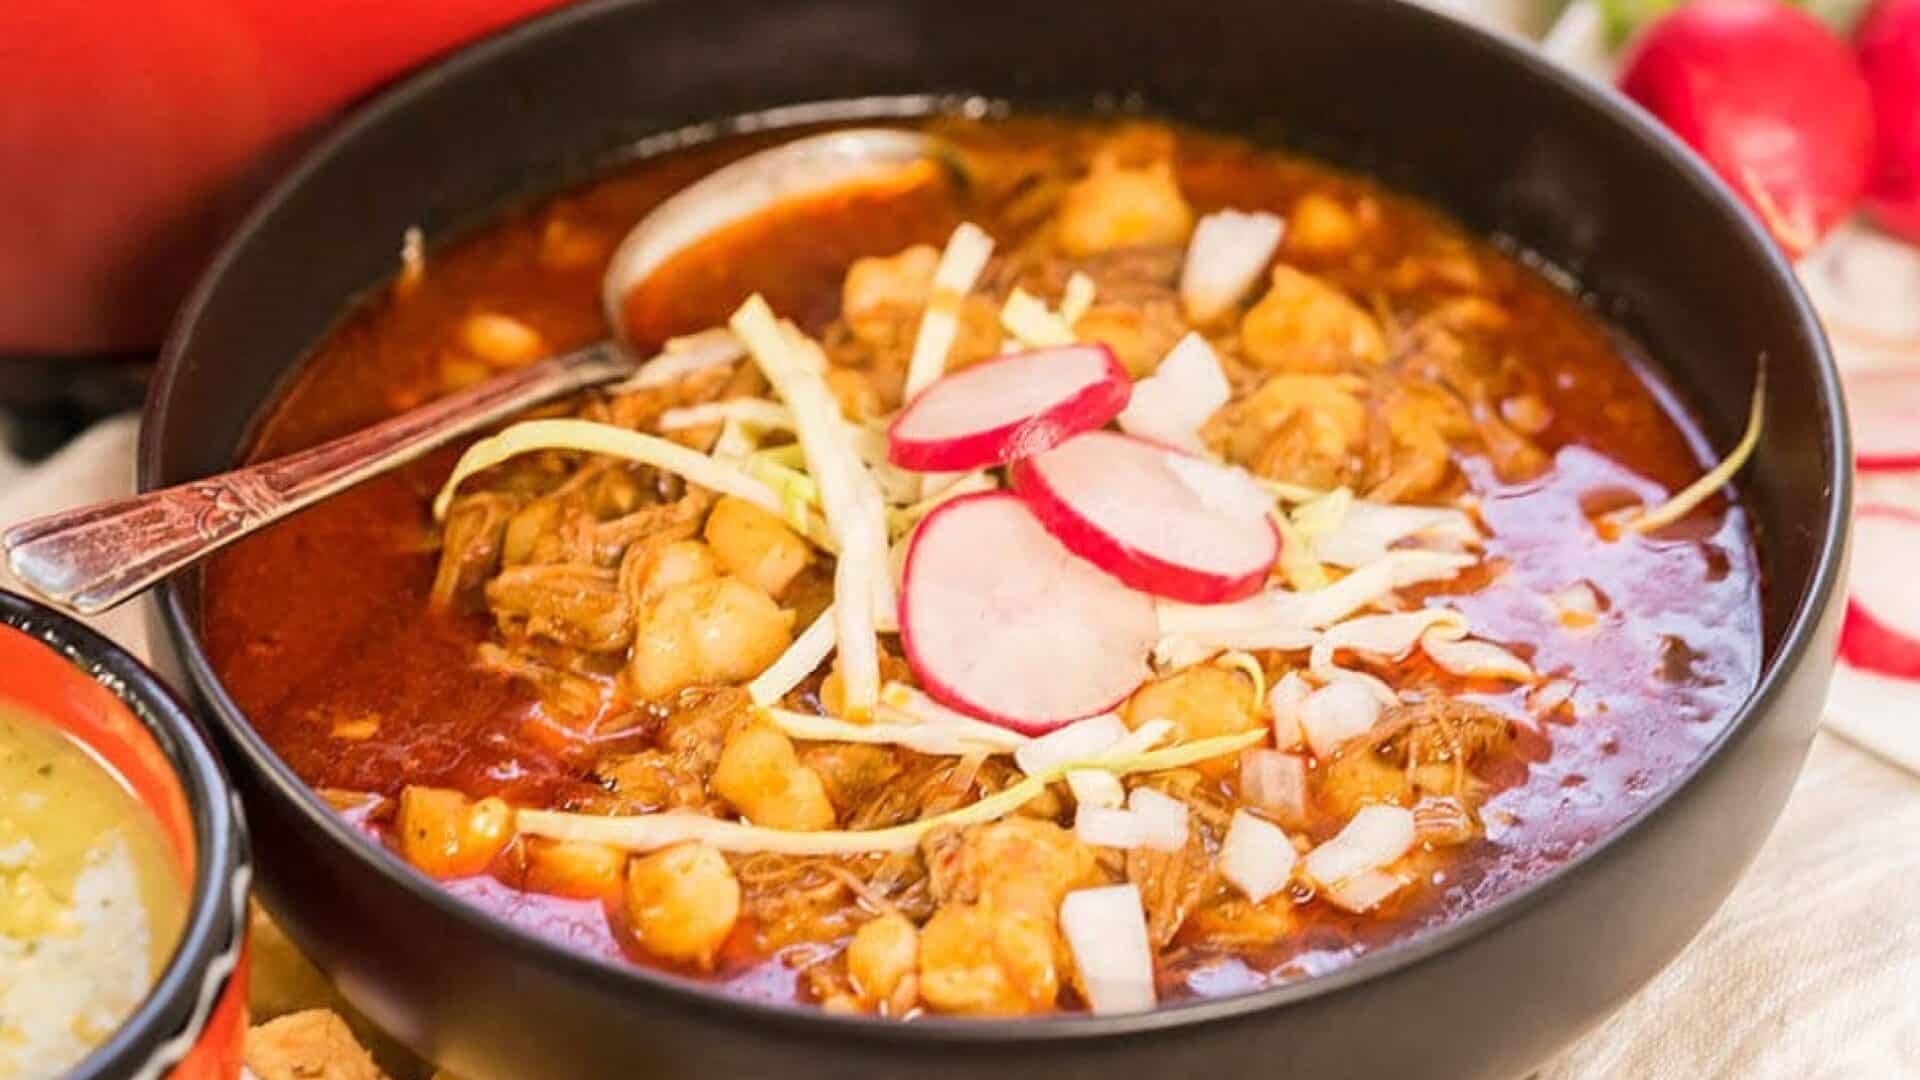 Bowl of New Mexico Posole Rojo with sliced cabbage, radish.